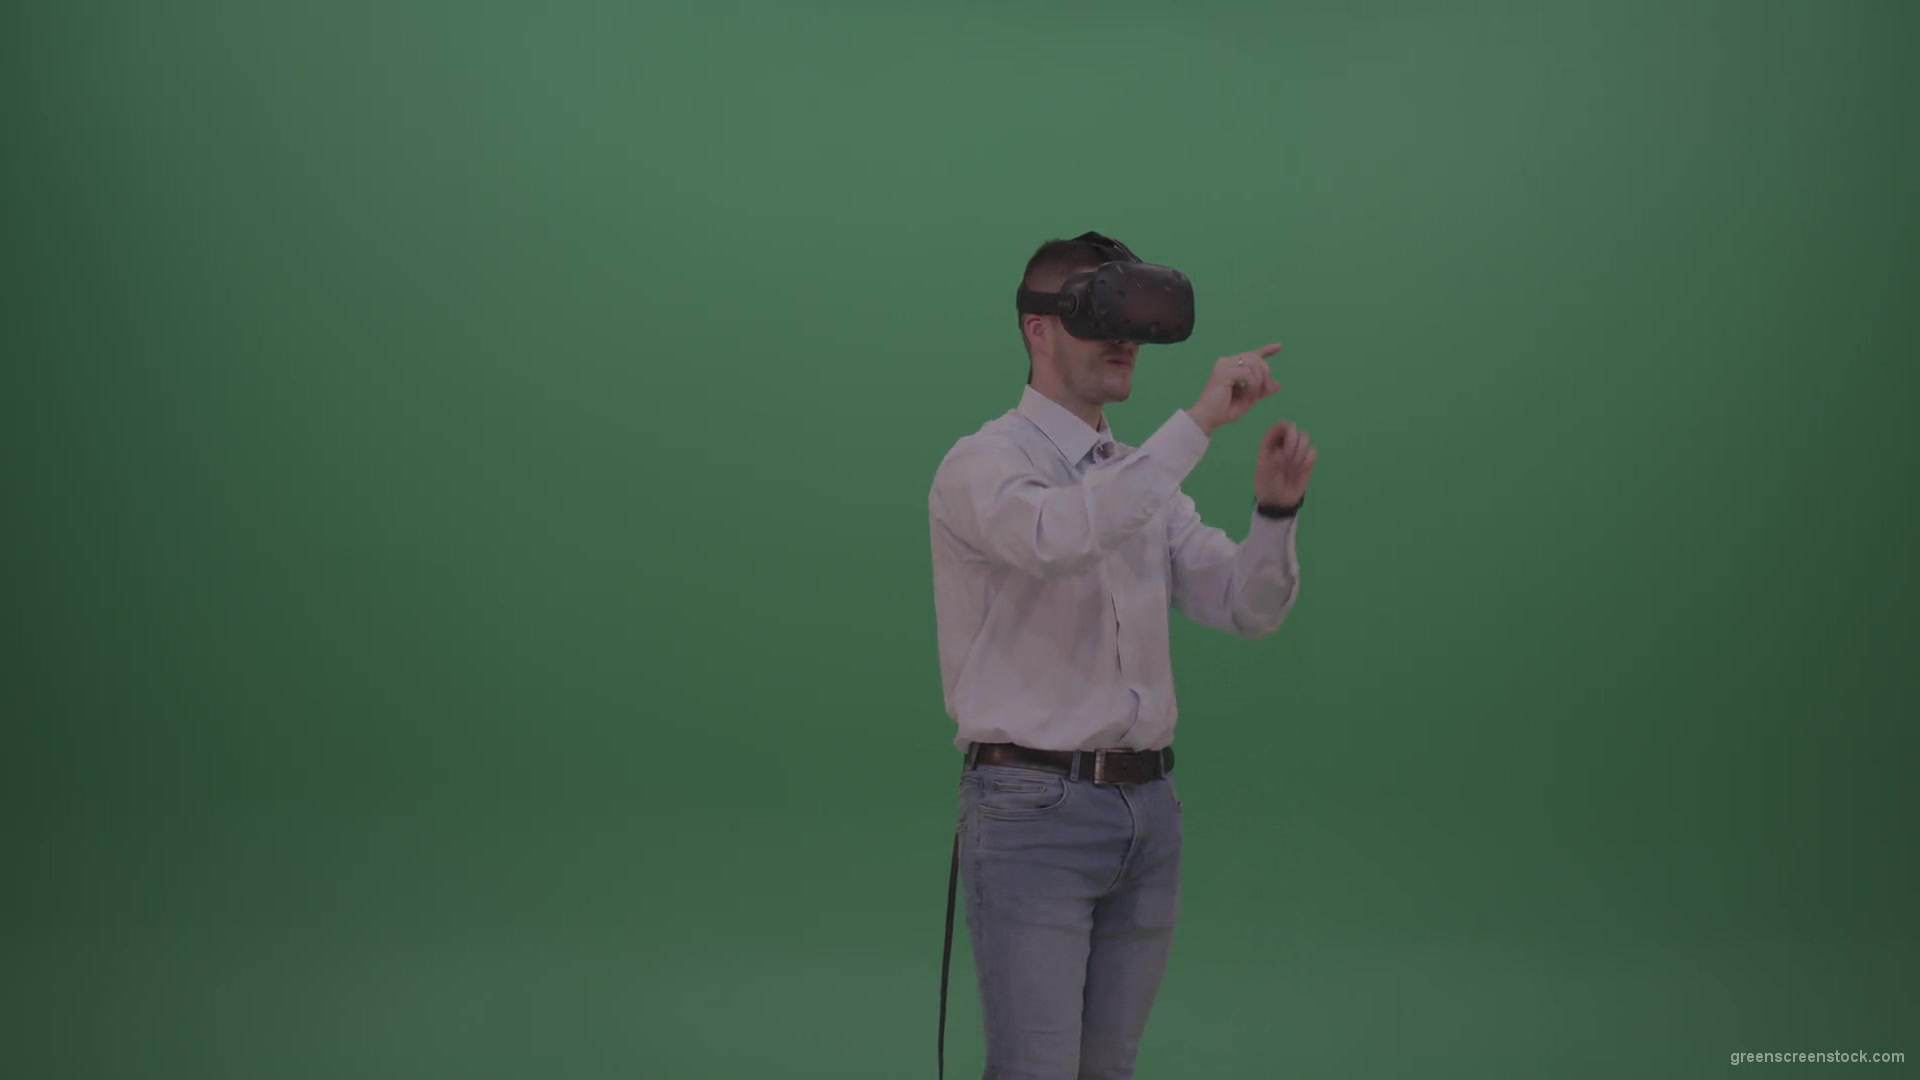 Young_Man_Wearing_White_Shirt_Making_Hard_Decision_Using_Virtual_Glasses_To_Solve_The_Task_Green_Screen_Wall_Chroma_Key_Background-1920_006 Green Screen Stock